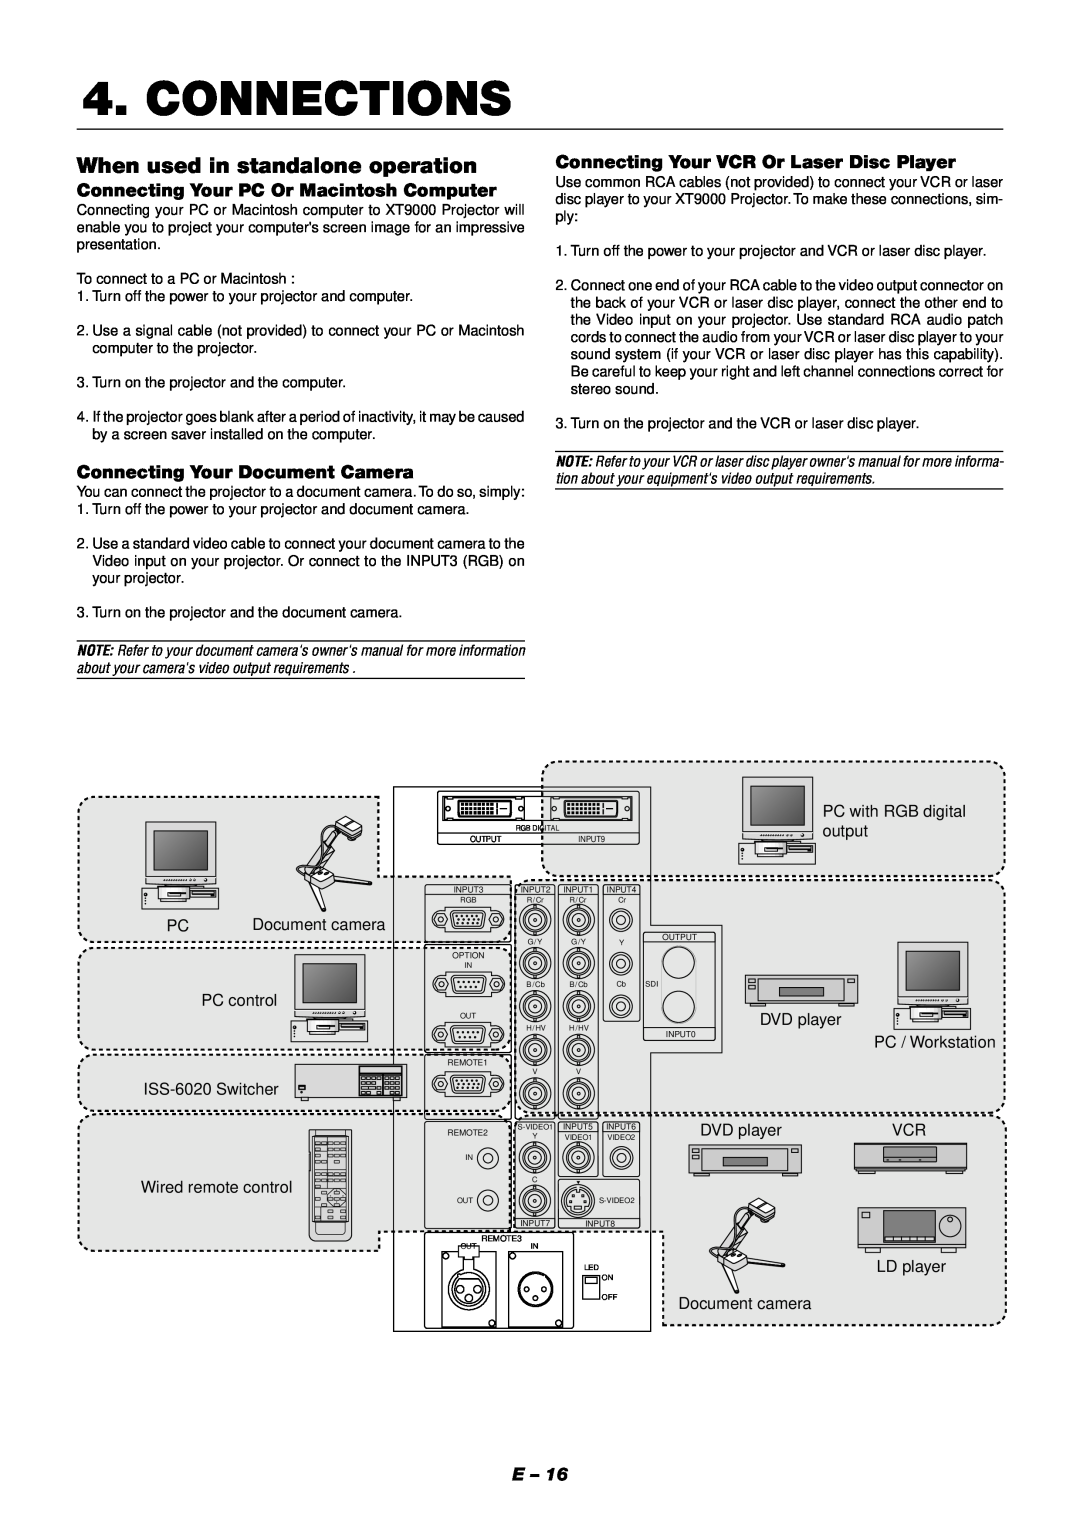 NEC XT9000 user manual Connections, When used in standalone operation, Connecting Your PC Or Macintosh Computer 